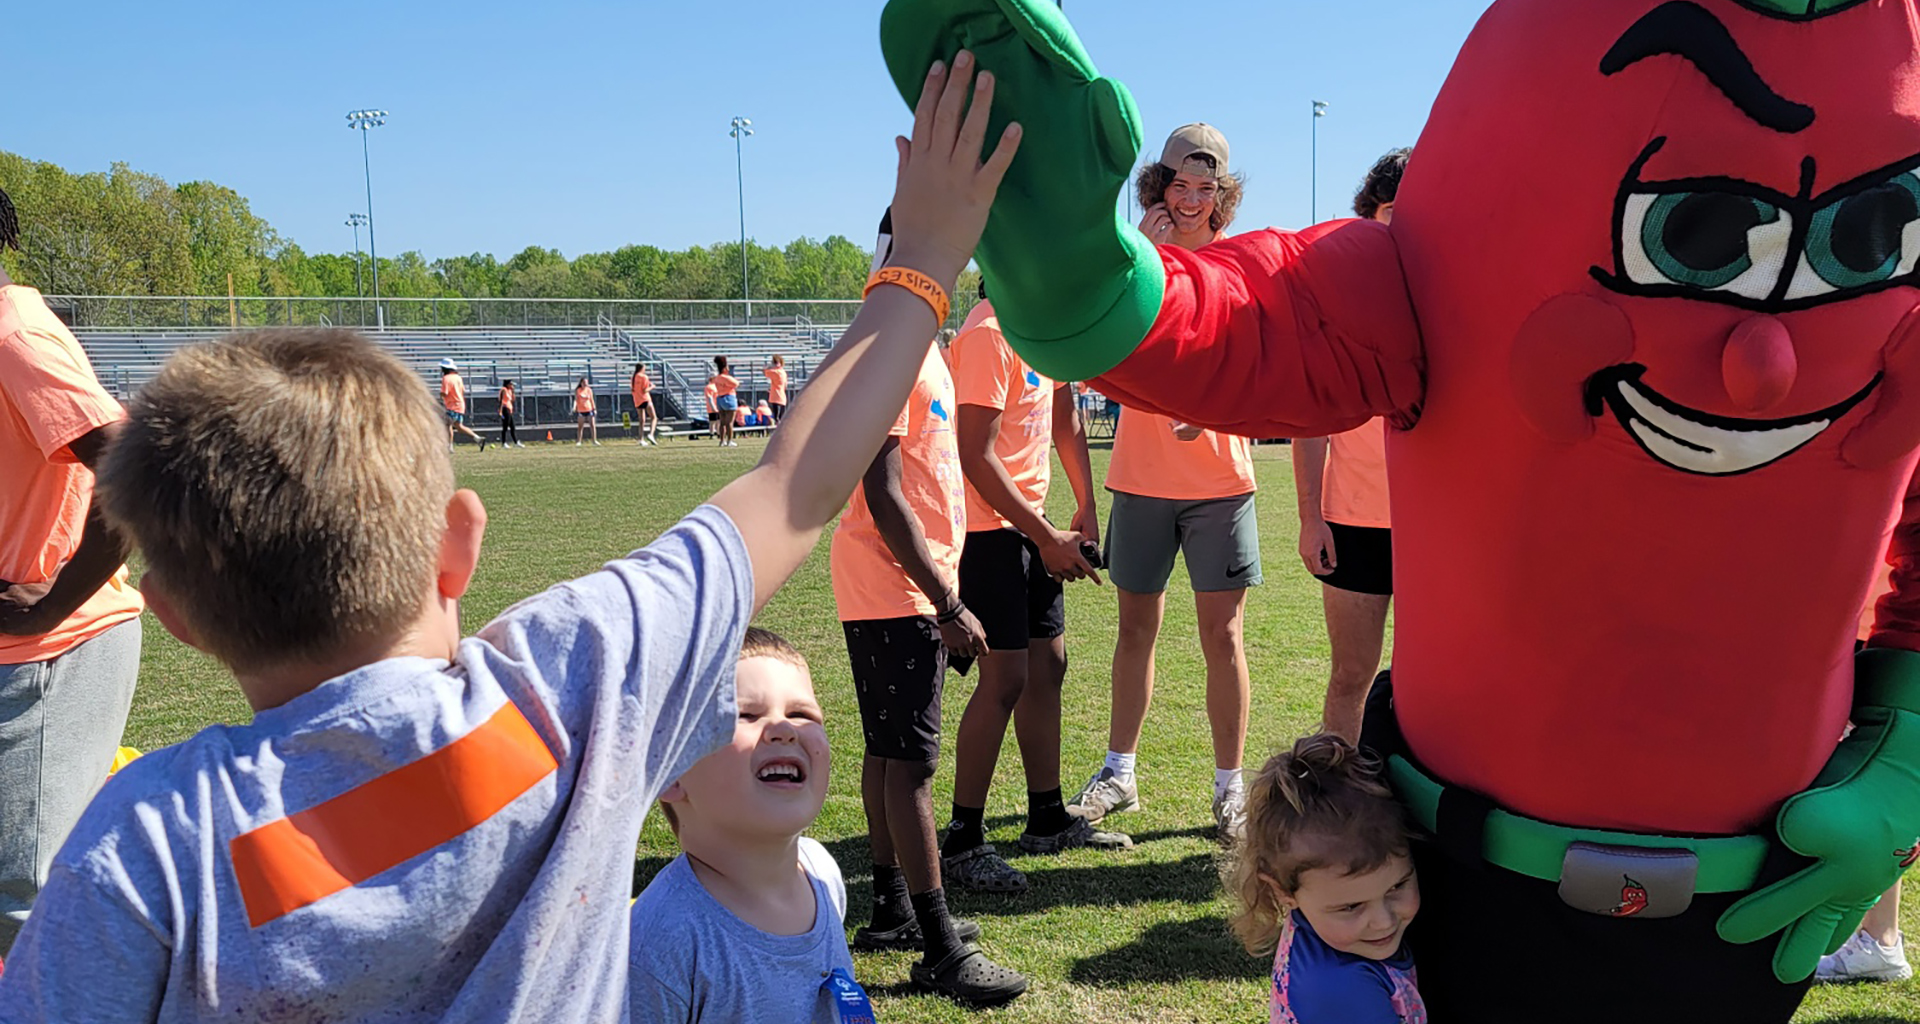 One student hugs and one student high-fives the mascot at an outdoor Olympic activity